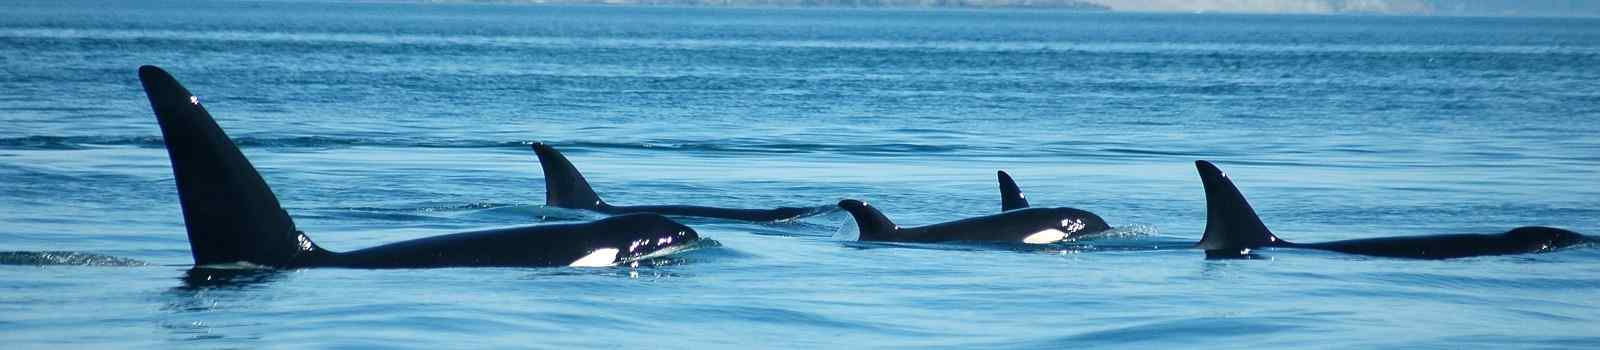 BUS-ERL-WCAD -Kanada Vancouver Island A group of transient marine mammal feeding orcas surfaces together  with San Juan Island